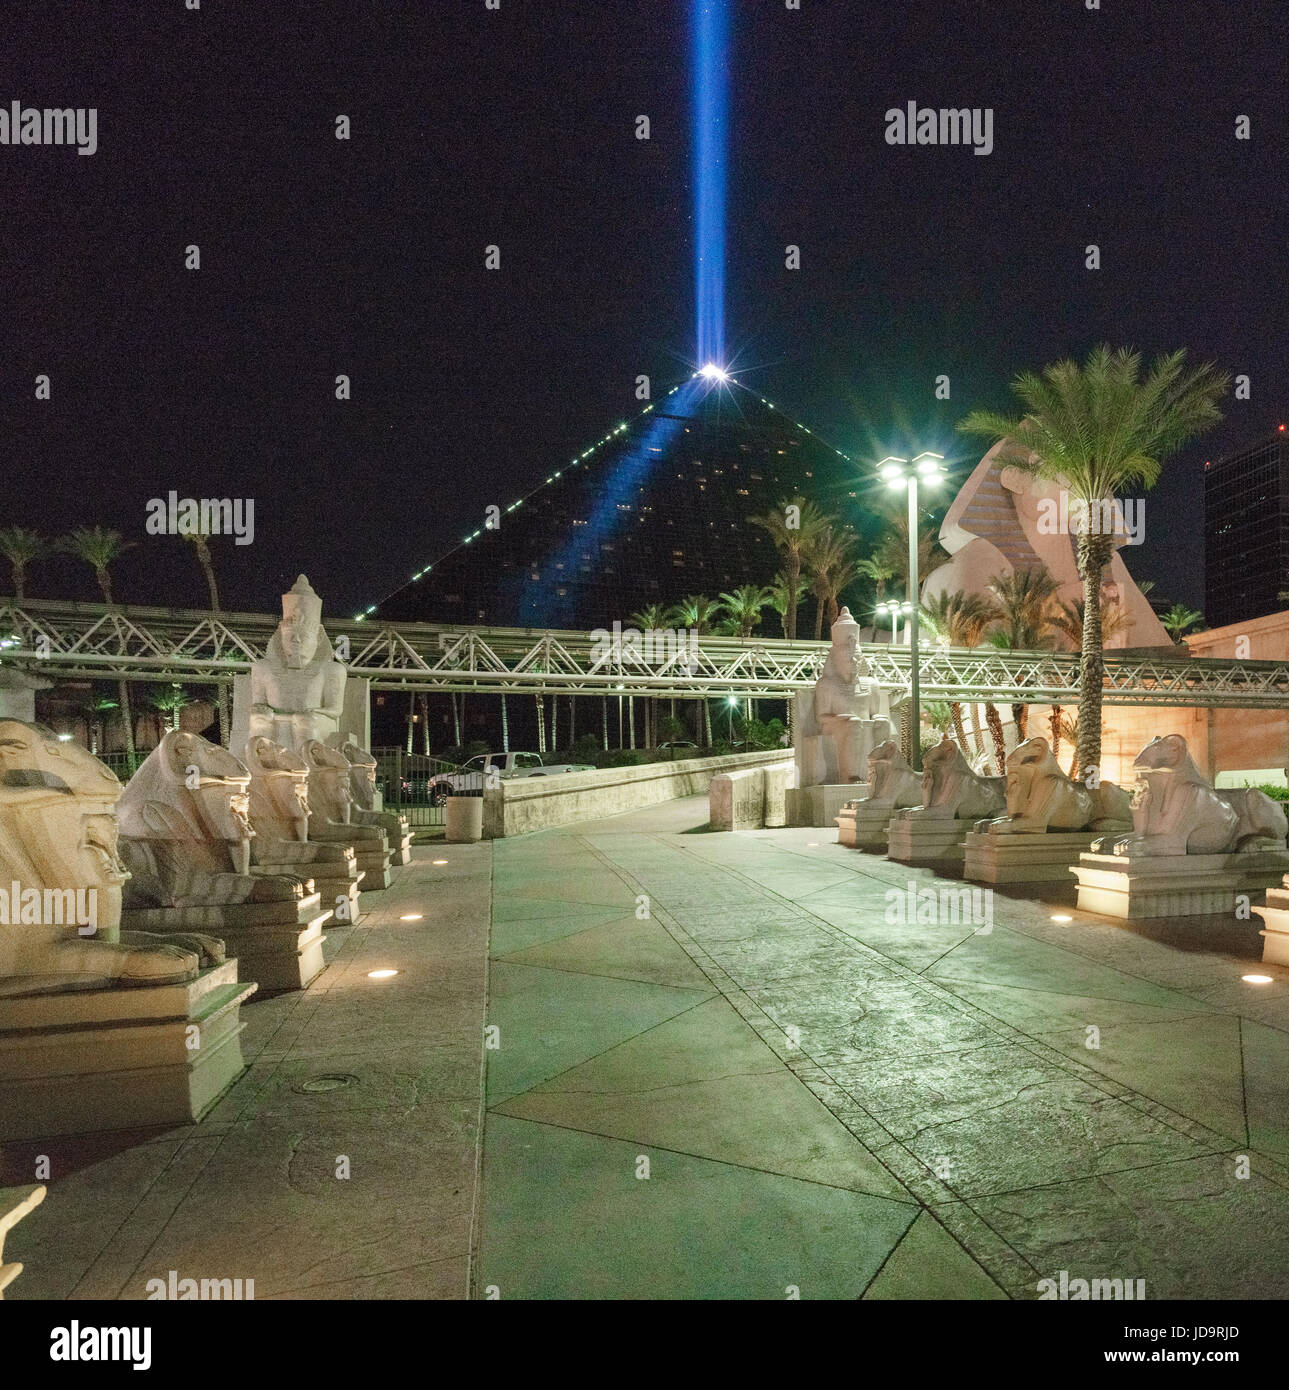 Luxor attraction with pyramid and blue laser beam, Las Vegas, Nevada, USA. Stock Photo